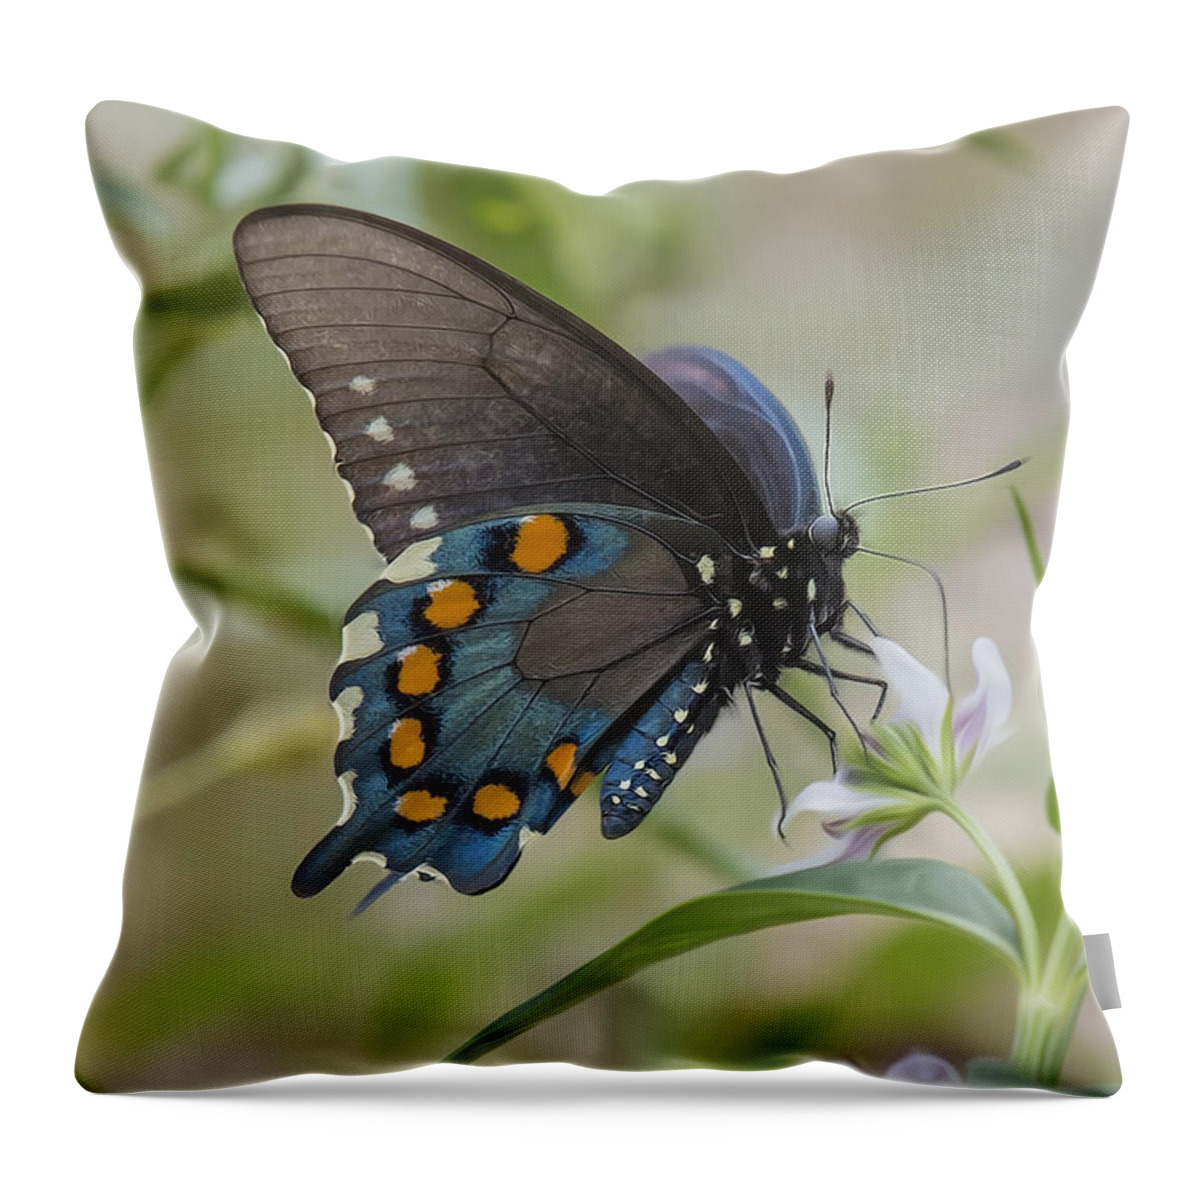 Insect Throw Pillow featuring the photograph Spicebush In Wildflowers by Bill and Linda Tiepelman